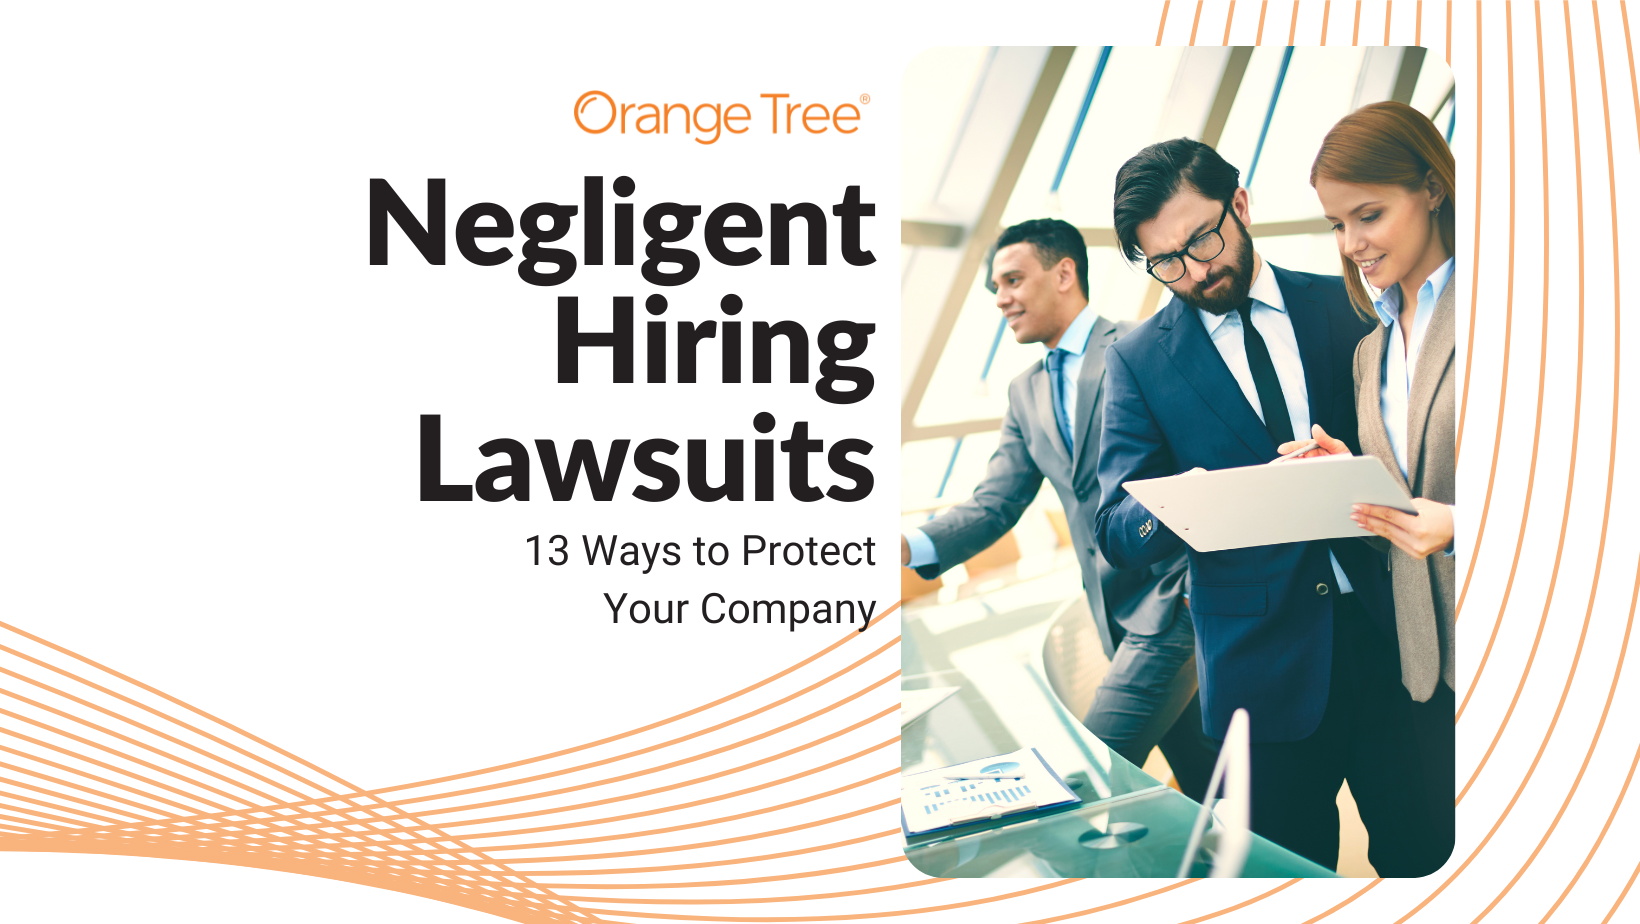 Negligent Hiring Lawsuits: 13 Ways to Protect Your Company | Orange Tree